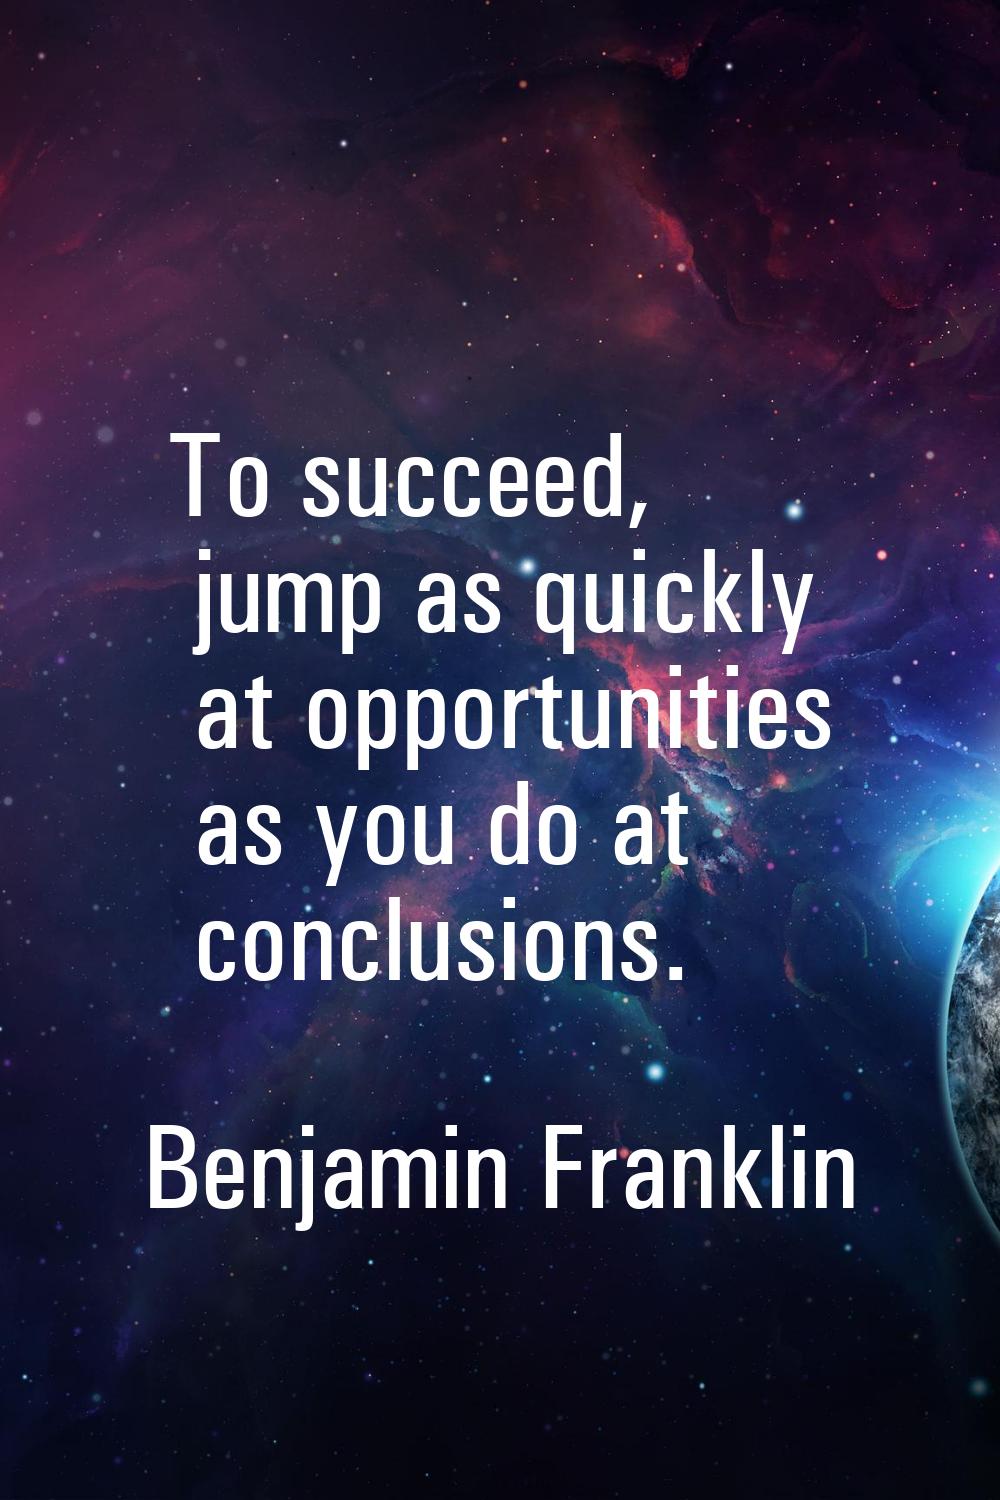 To succeed, jump as quickly at opportunities as you do at conclusions.